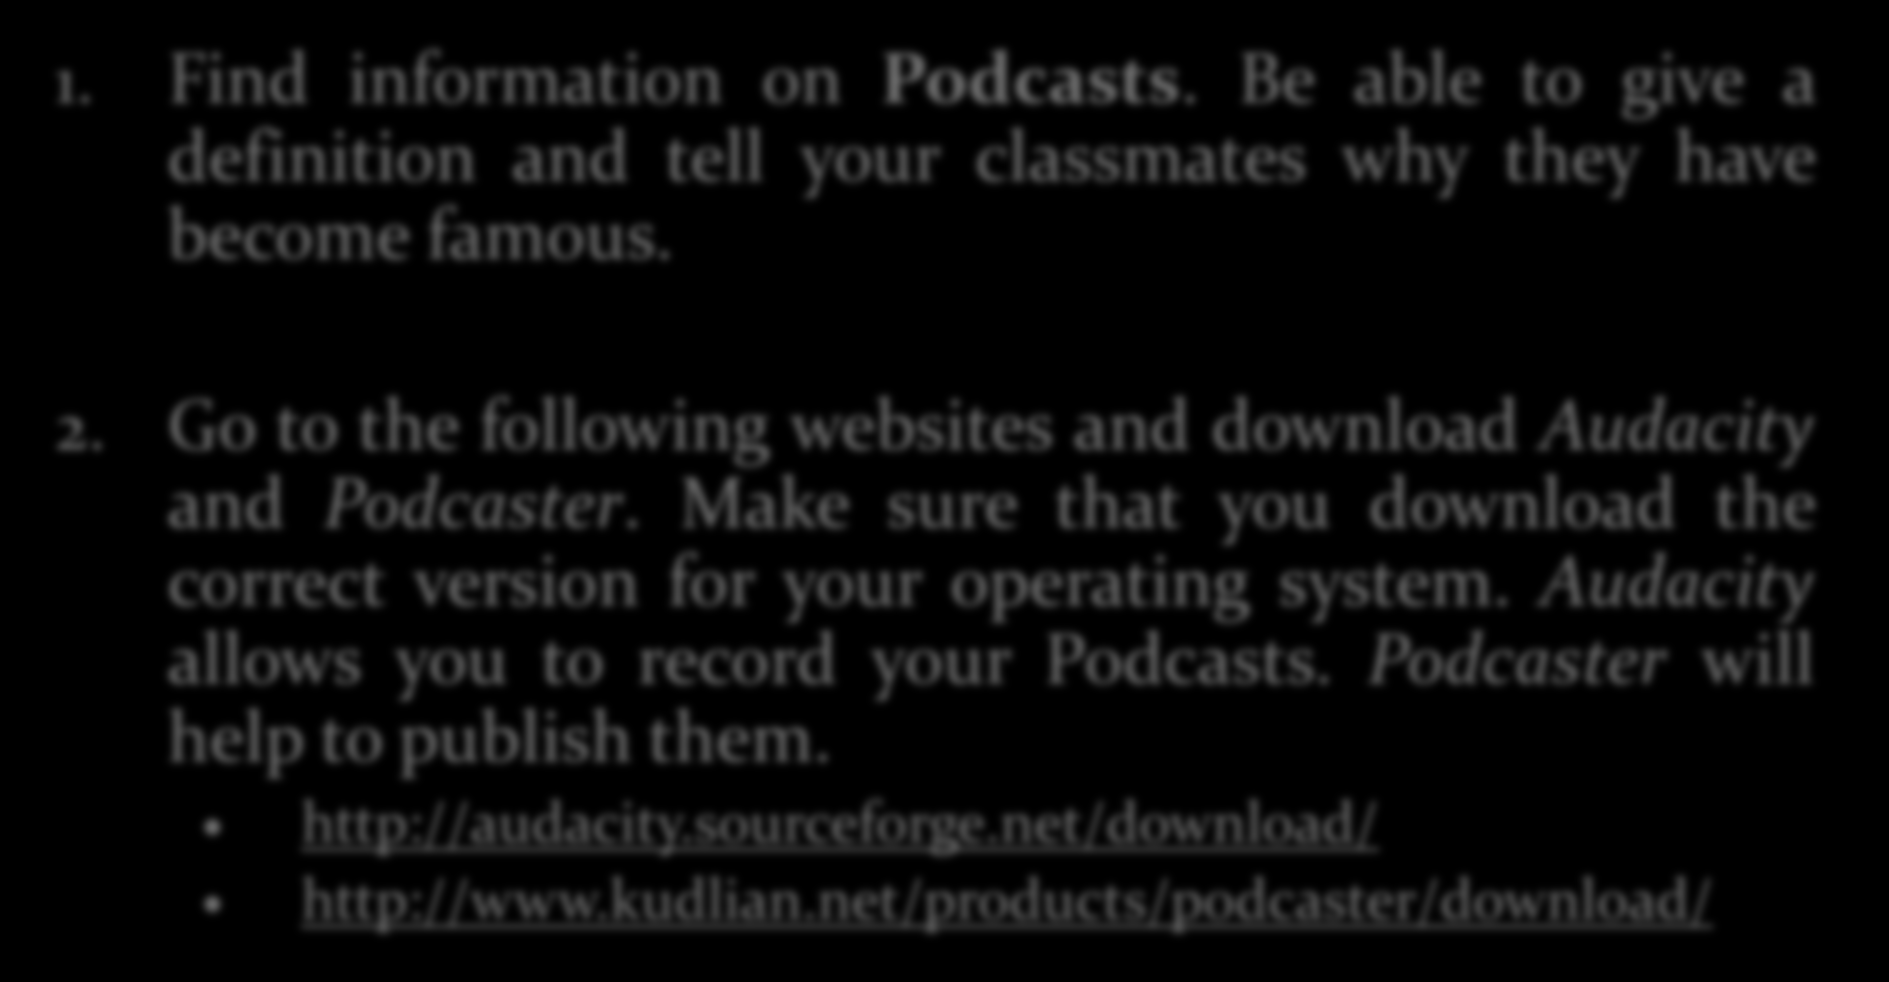 How to Produce Your Own Podcasts 1. Find information on Podcasts.